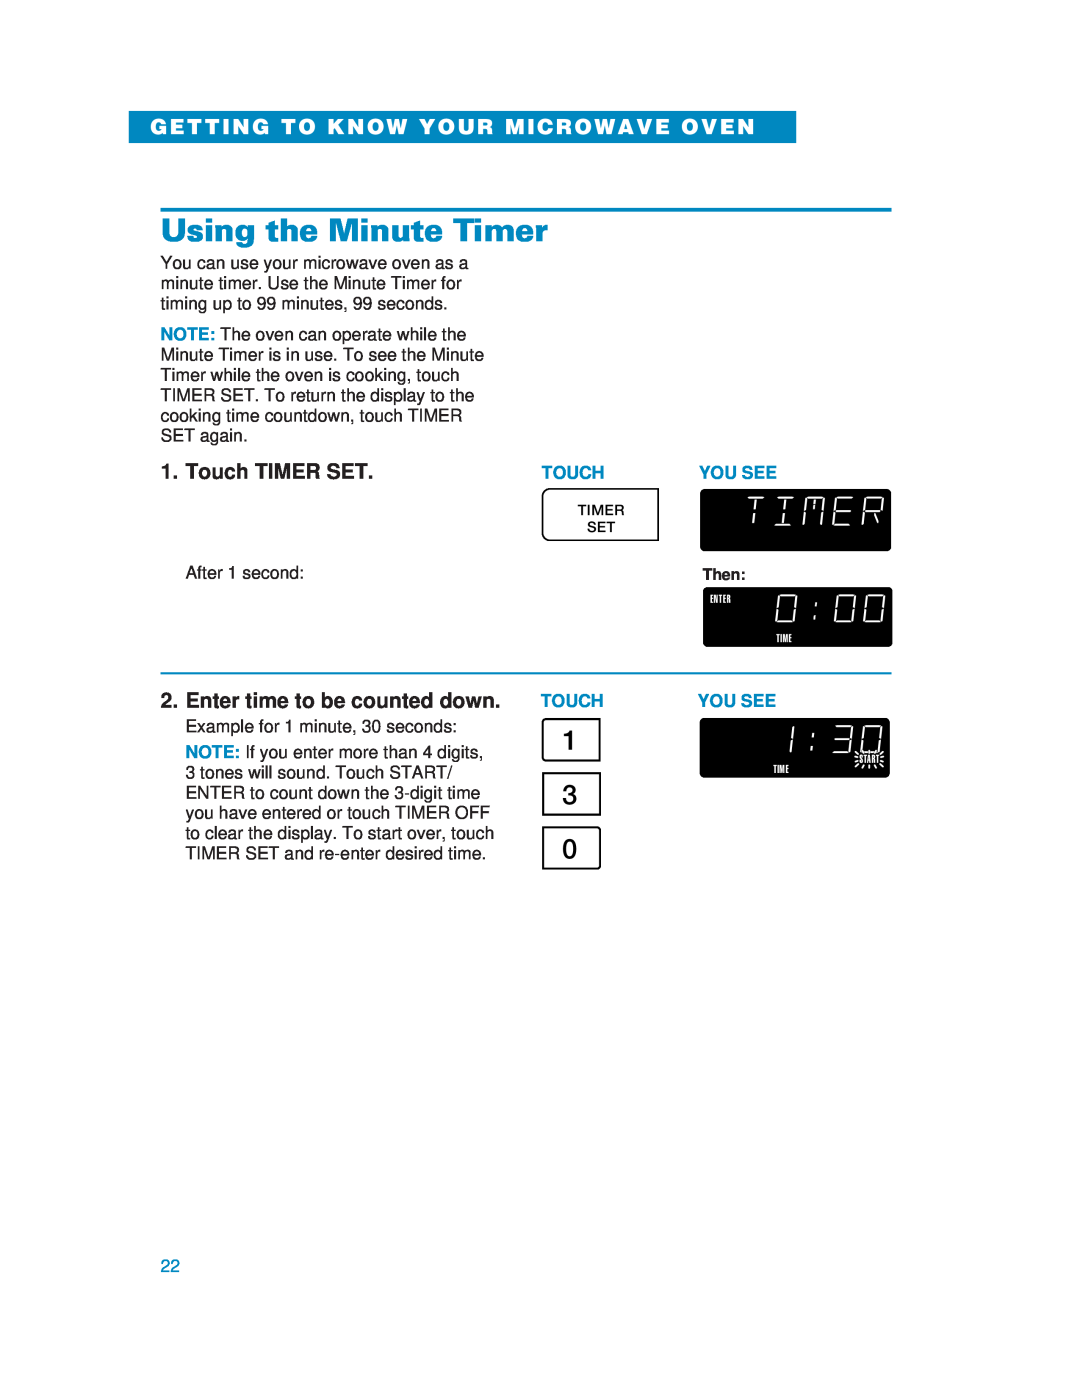 Whirlpool YMH6130XE warranty Using the Minute Timer, Touch TIMER SET, Enter time to be counted down, After 1 second 